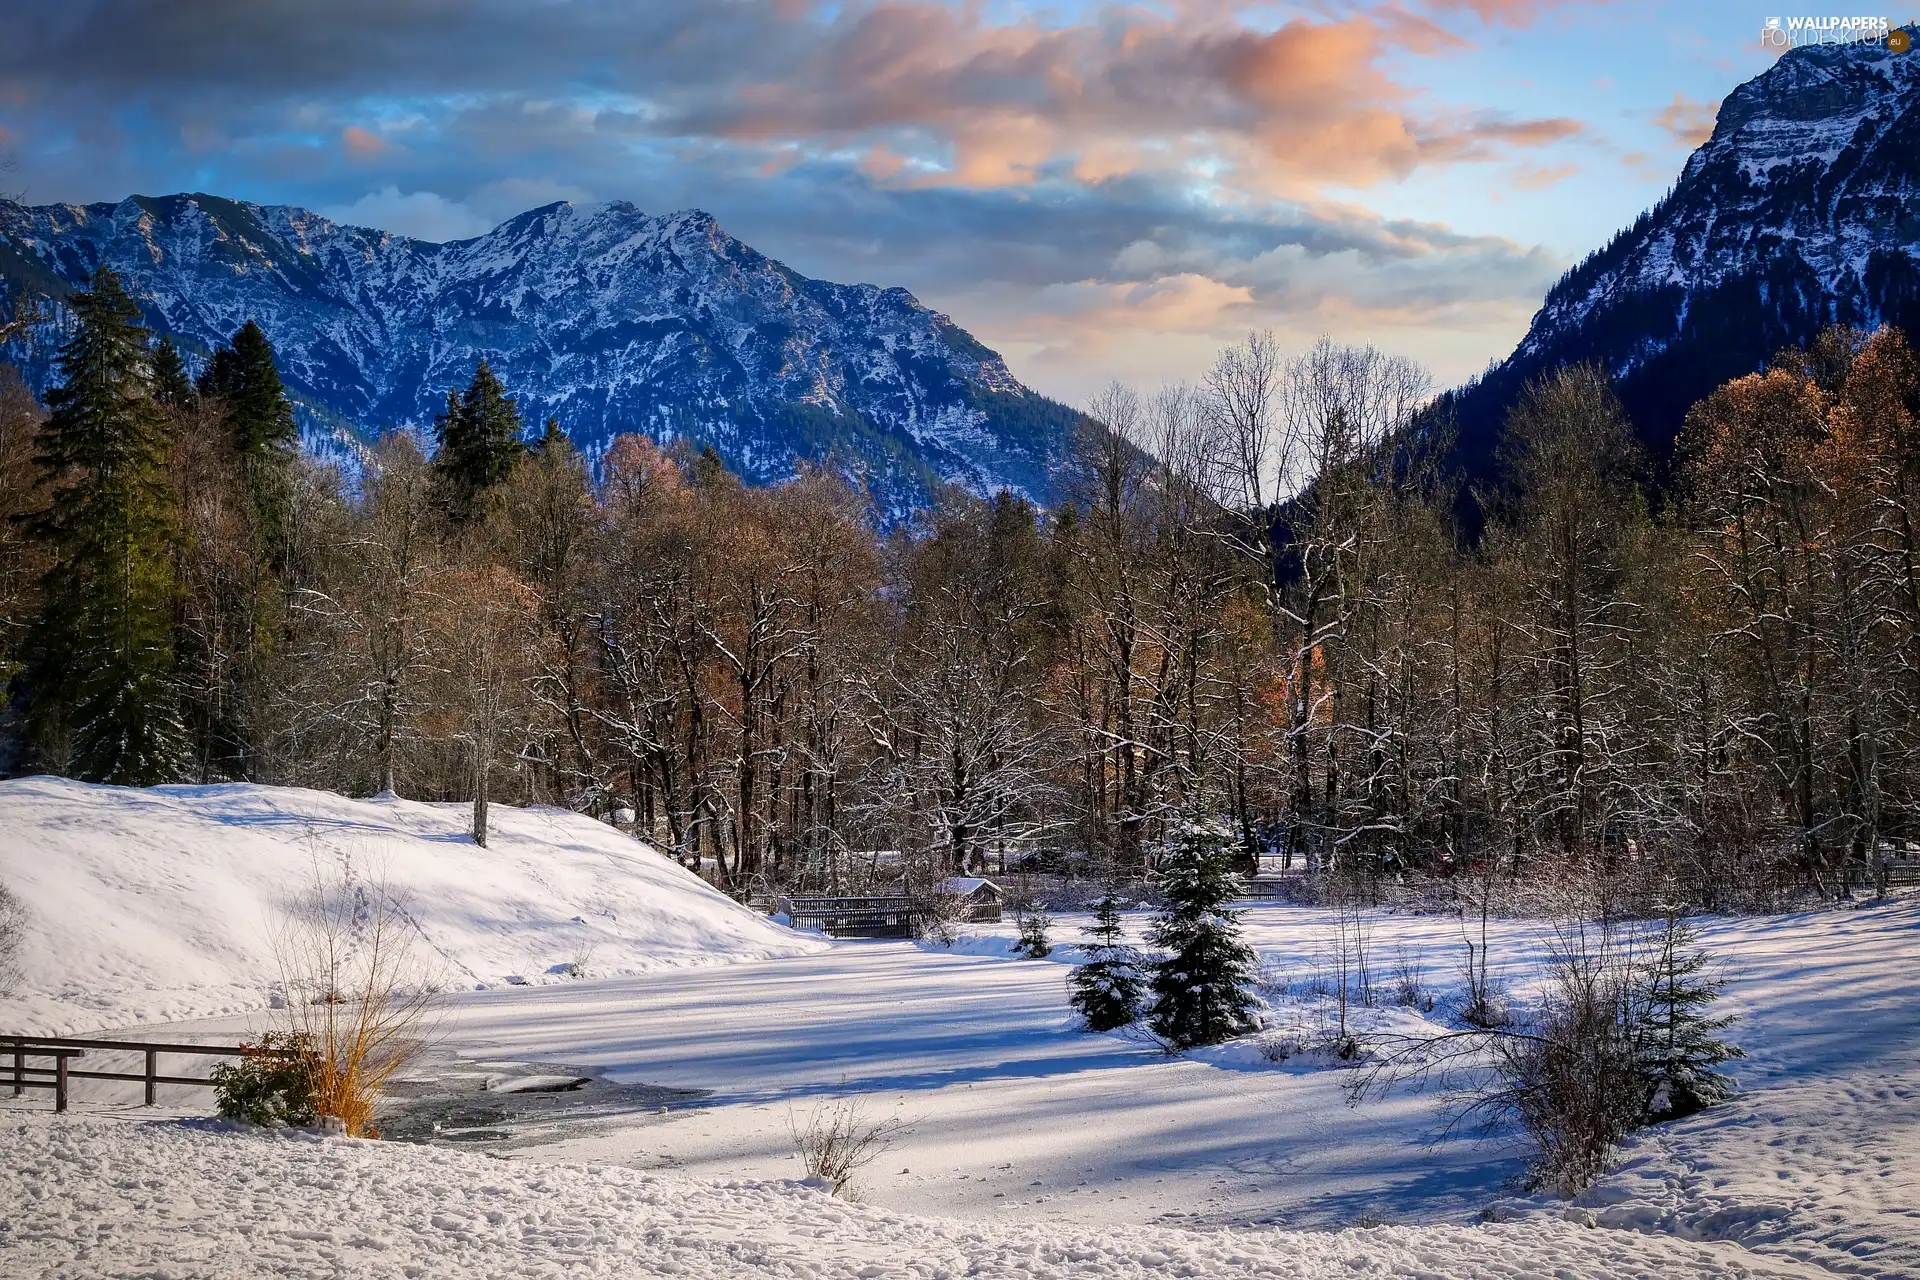 Valley, snowy, bridges, Pond - car, viewes, Mountains, winter, trees